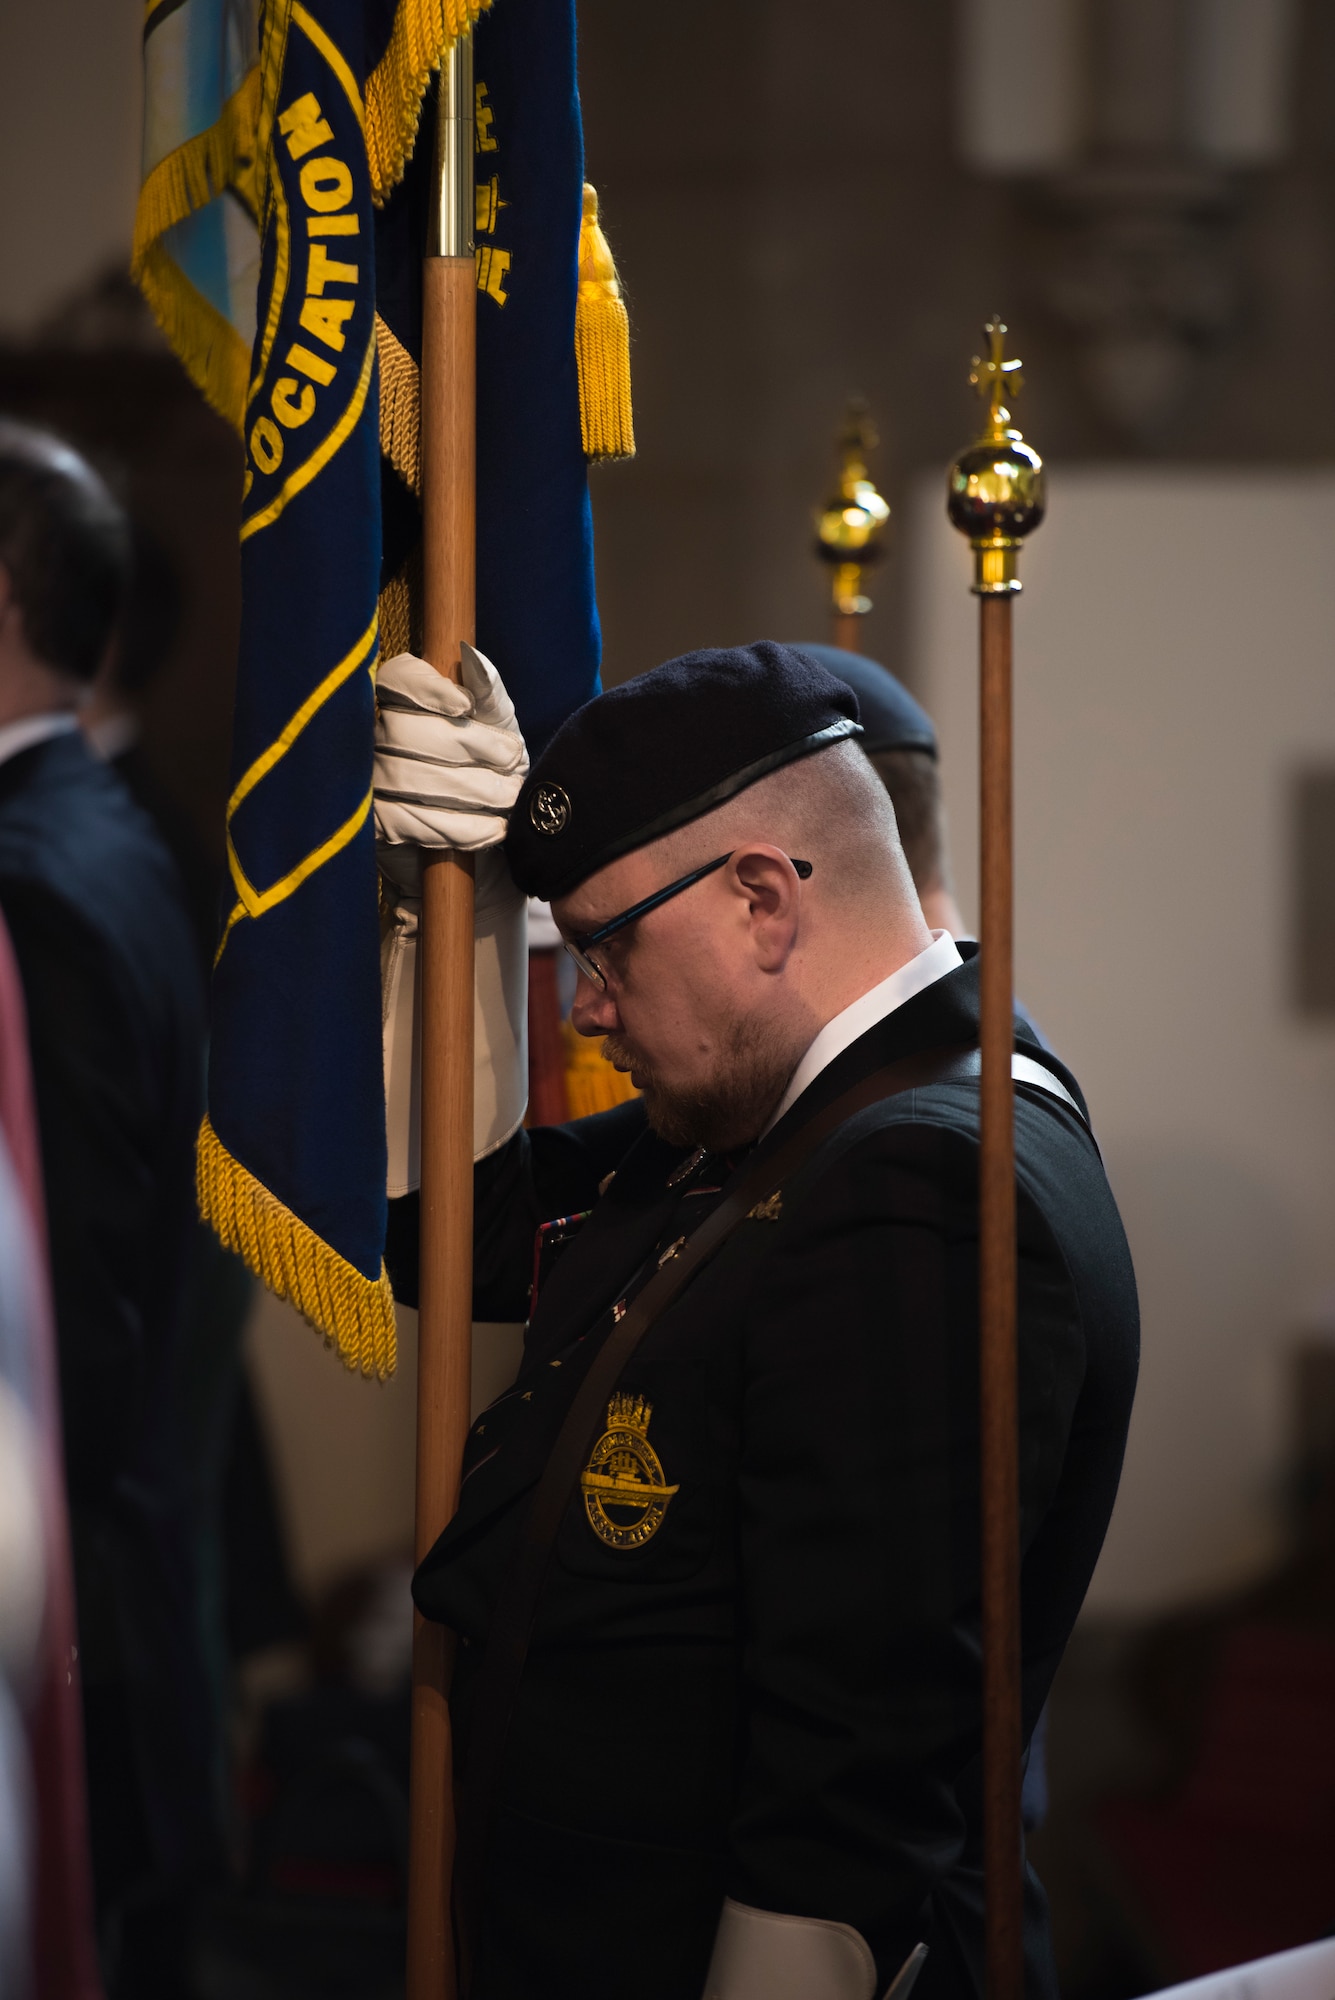 A member of the Royal Air Force Association bows his head during a benediction for the crew of the Mi Amigo in St. Augustine’s Church, Sheffield, United Kingdom, February 24th, 2019. This year’s annual memorial service was accompanied by a United States Air Force and Royal Air Force flypast in Endcliffe Park two days prior, where thousands of U.K. residents honored the memory of ten fallen U.S. Airmen who died when their war-crippled B-17 Flying Fortress crash landed to avoid killing residents and nearby children. (U.S. Air Force photo by Tech Sgt. Aaron Thomasson)